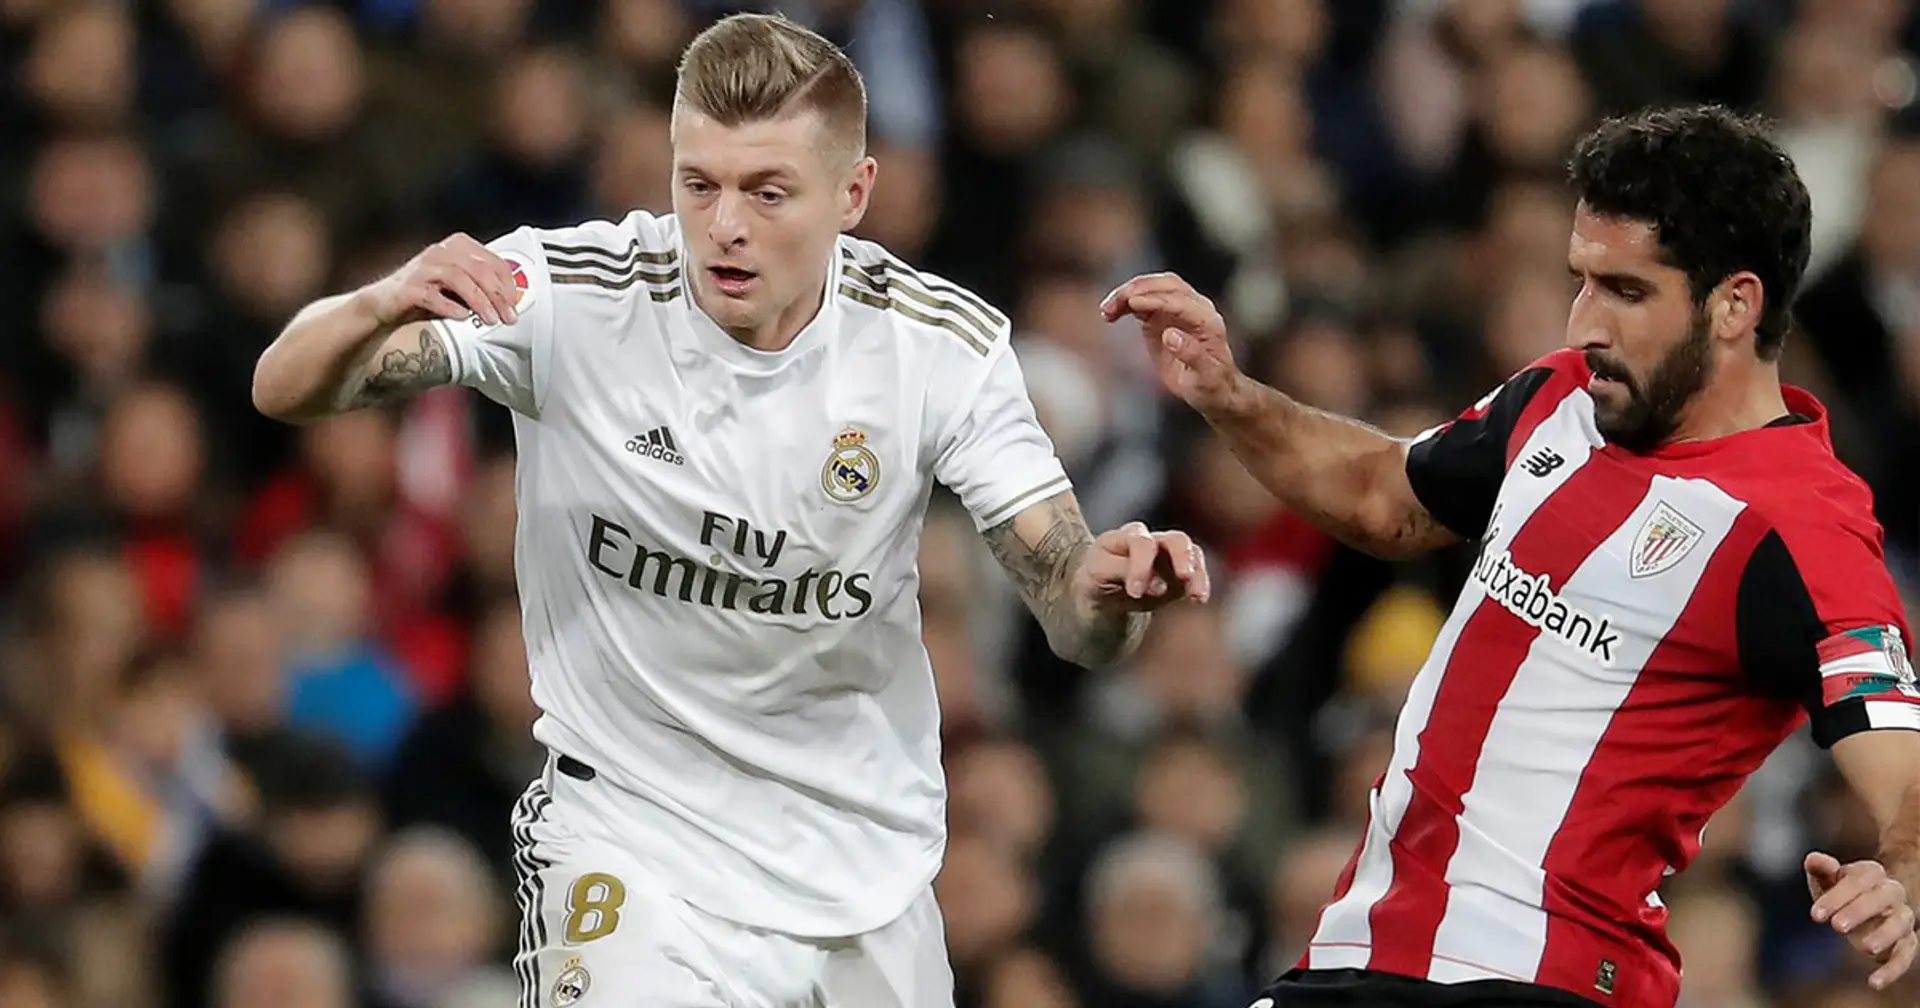 Athletic Bilbao vs Real Madrid: line-ups, score predictions, key stats & more — preview